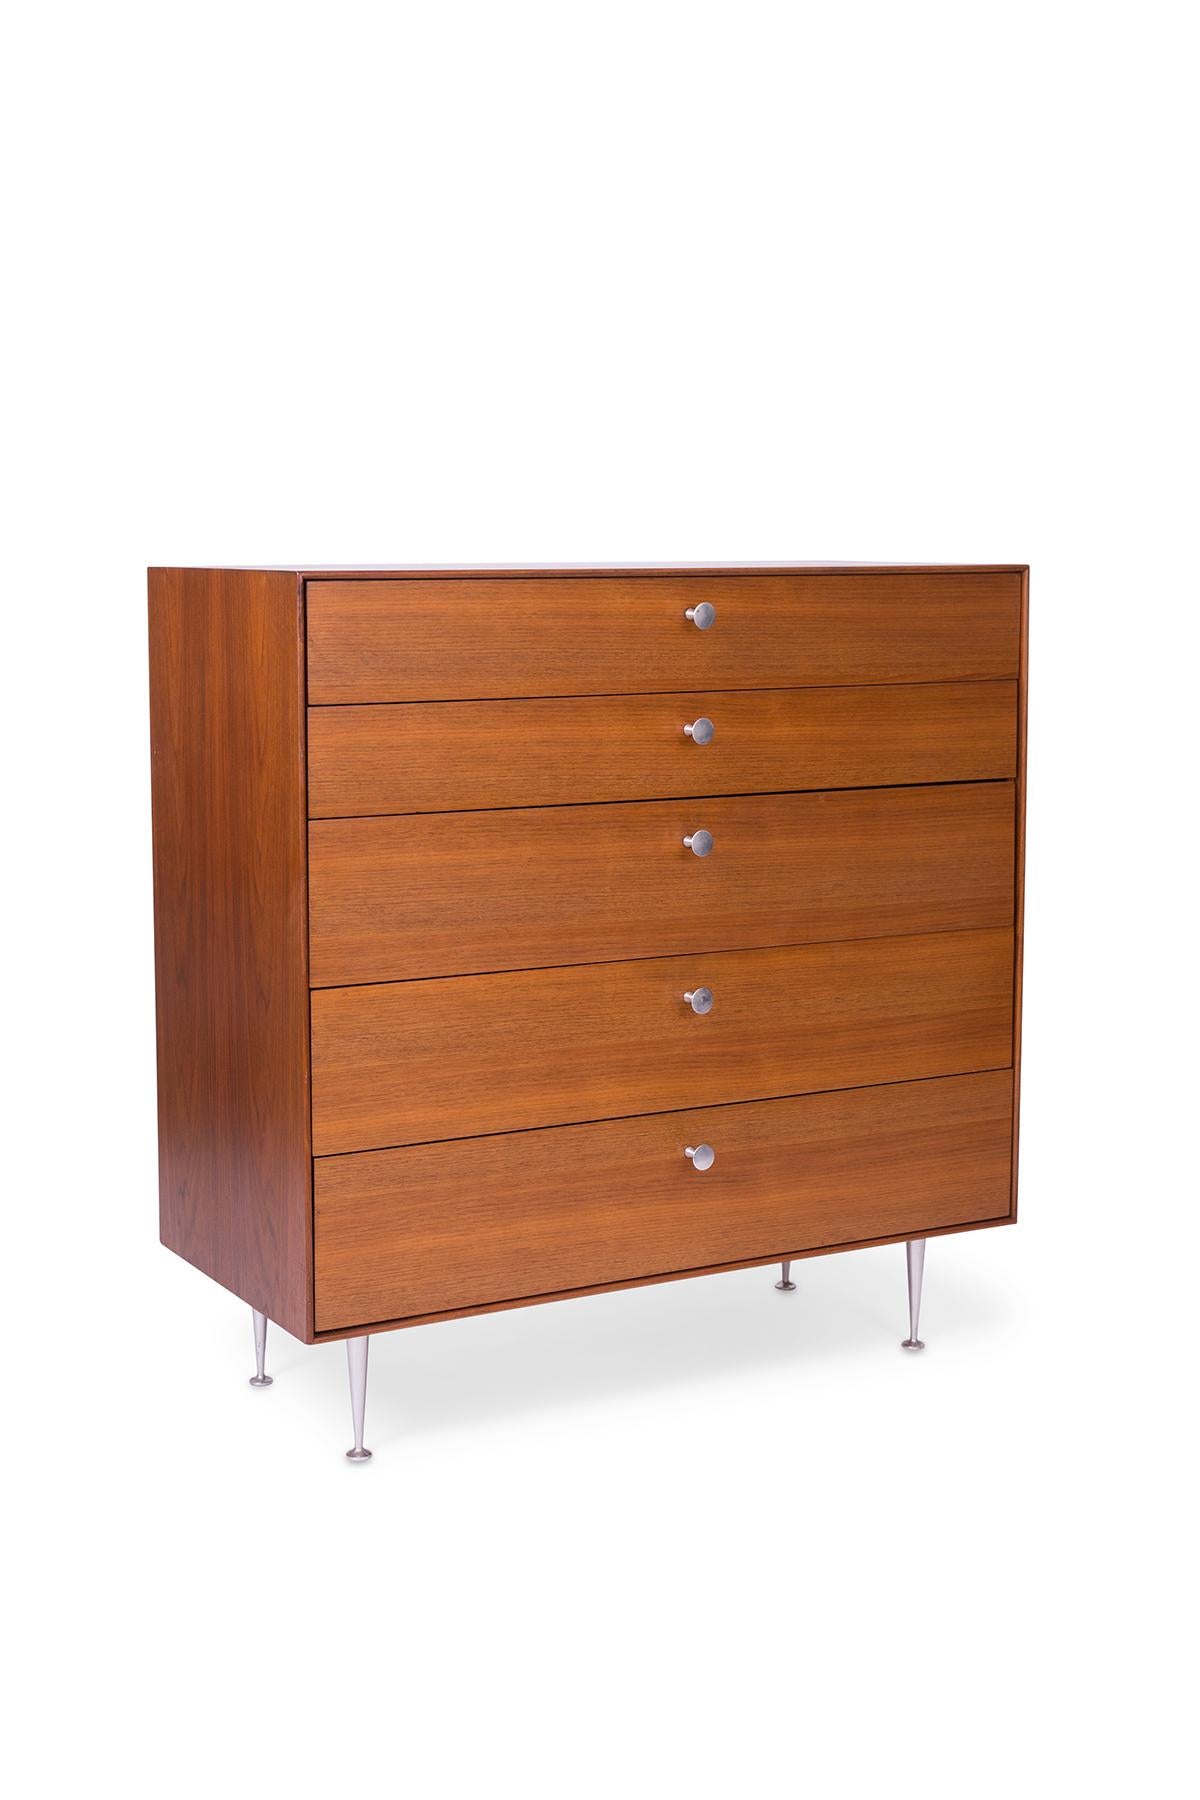 George Nelson for Herman Miller highboy dresser, circa early 1960s. This all original example has beautifully grained walnut case and drawer fronts. Original thin edge legs and pulls.